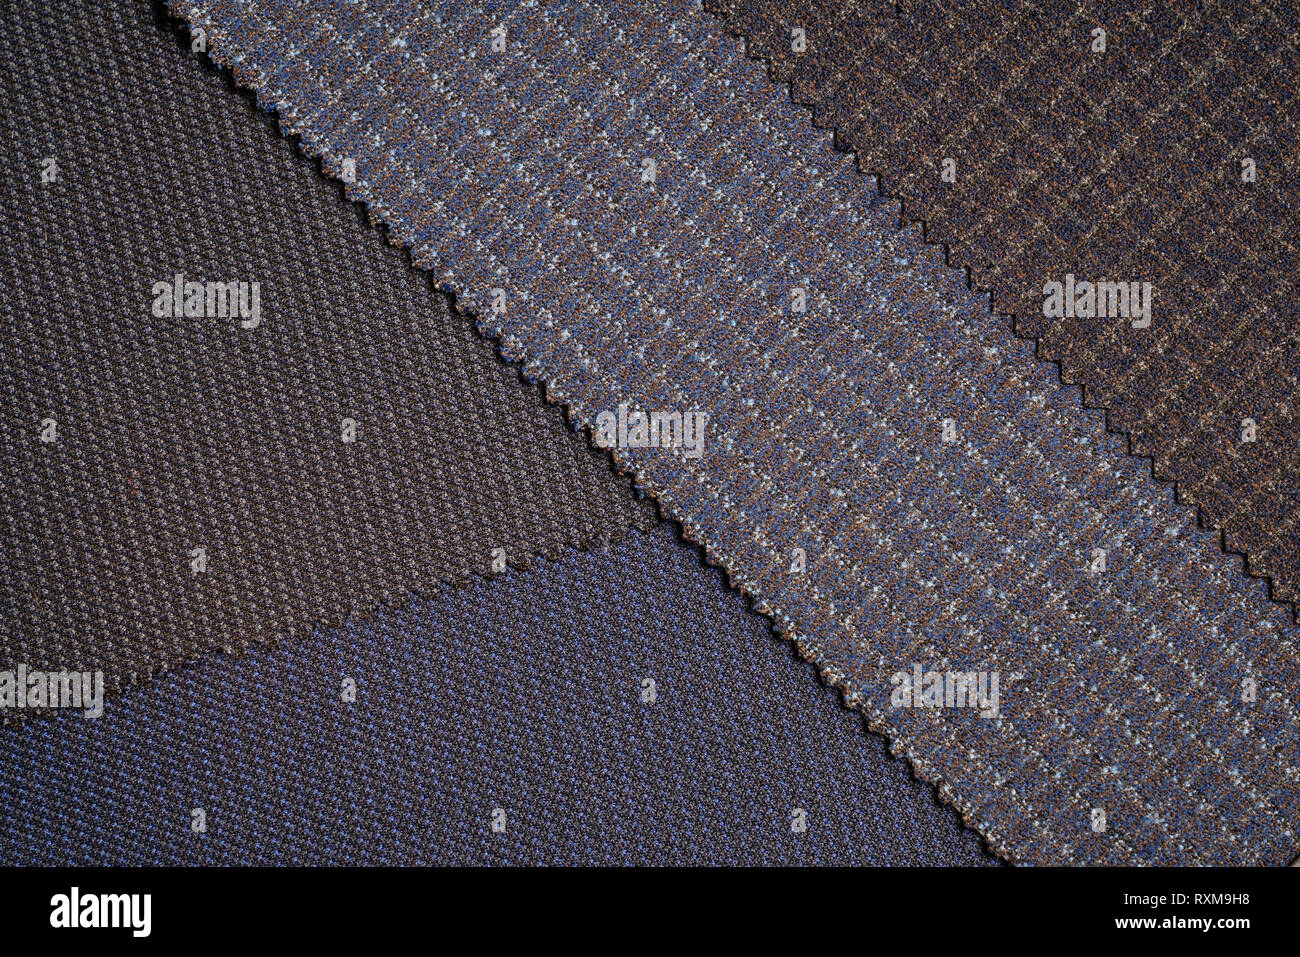 Close up sample fabric for interior design, material selection Stock Photo